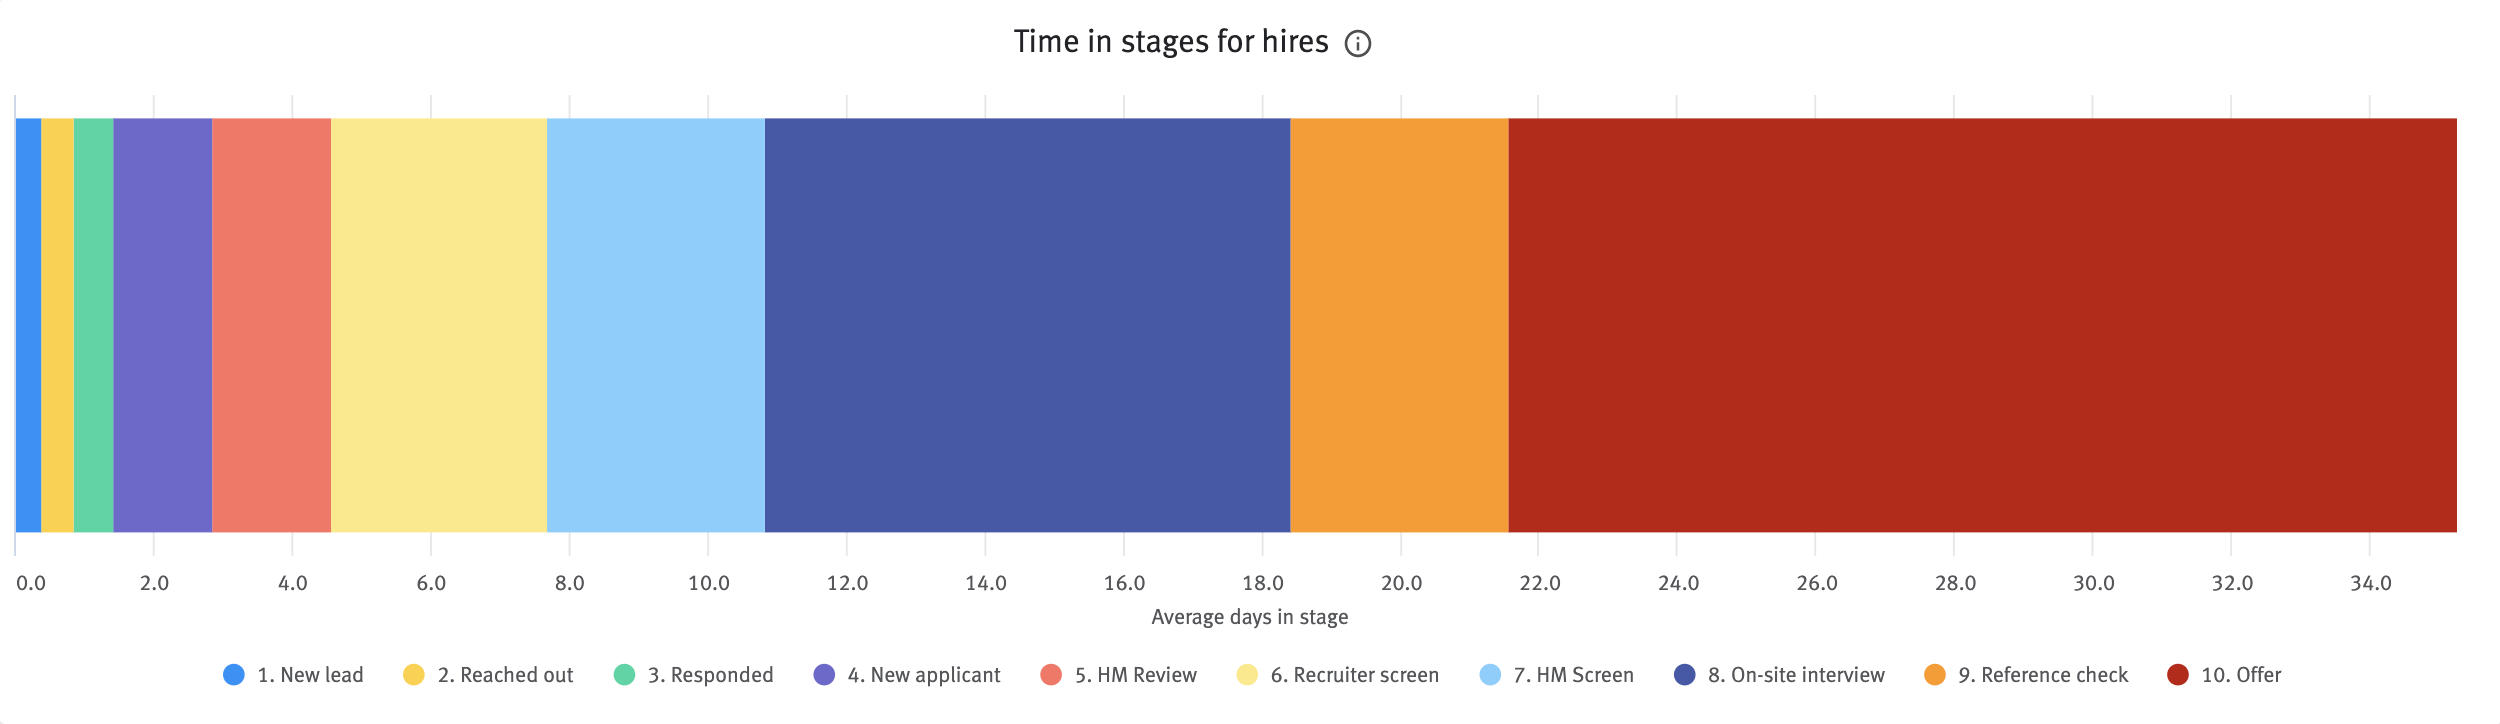 Time in stages for hires chart